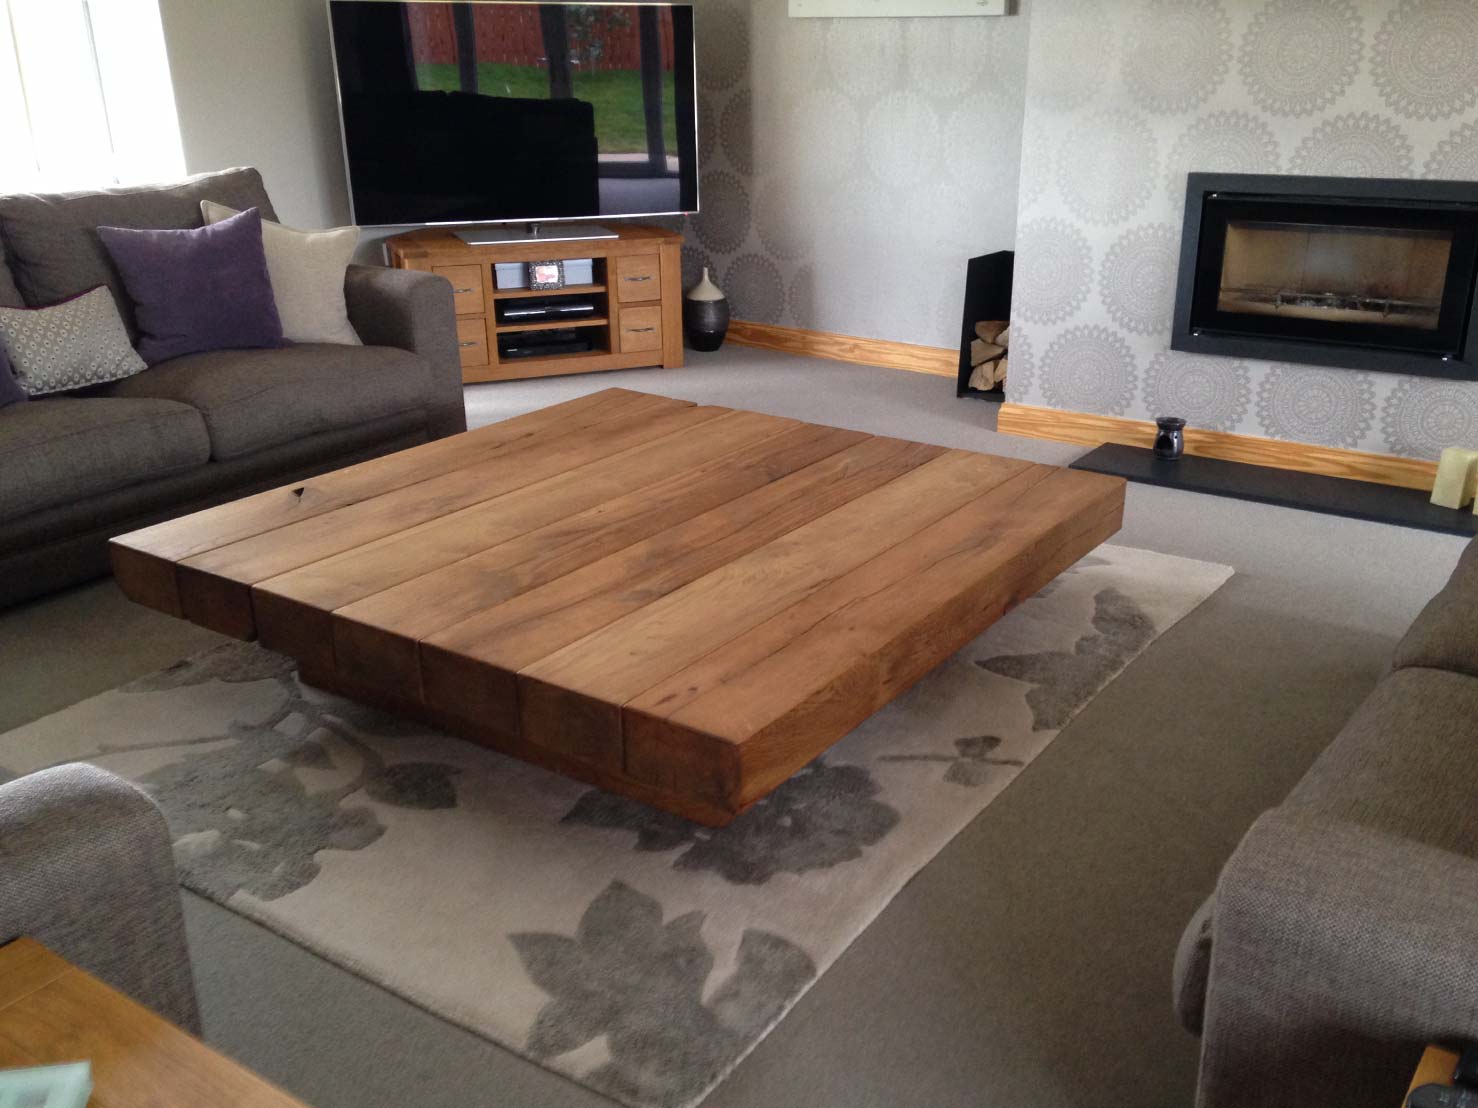 Square Oak Coffee Table From Abacus Tables Arabica Floating Style Beam Table Project 201 